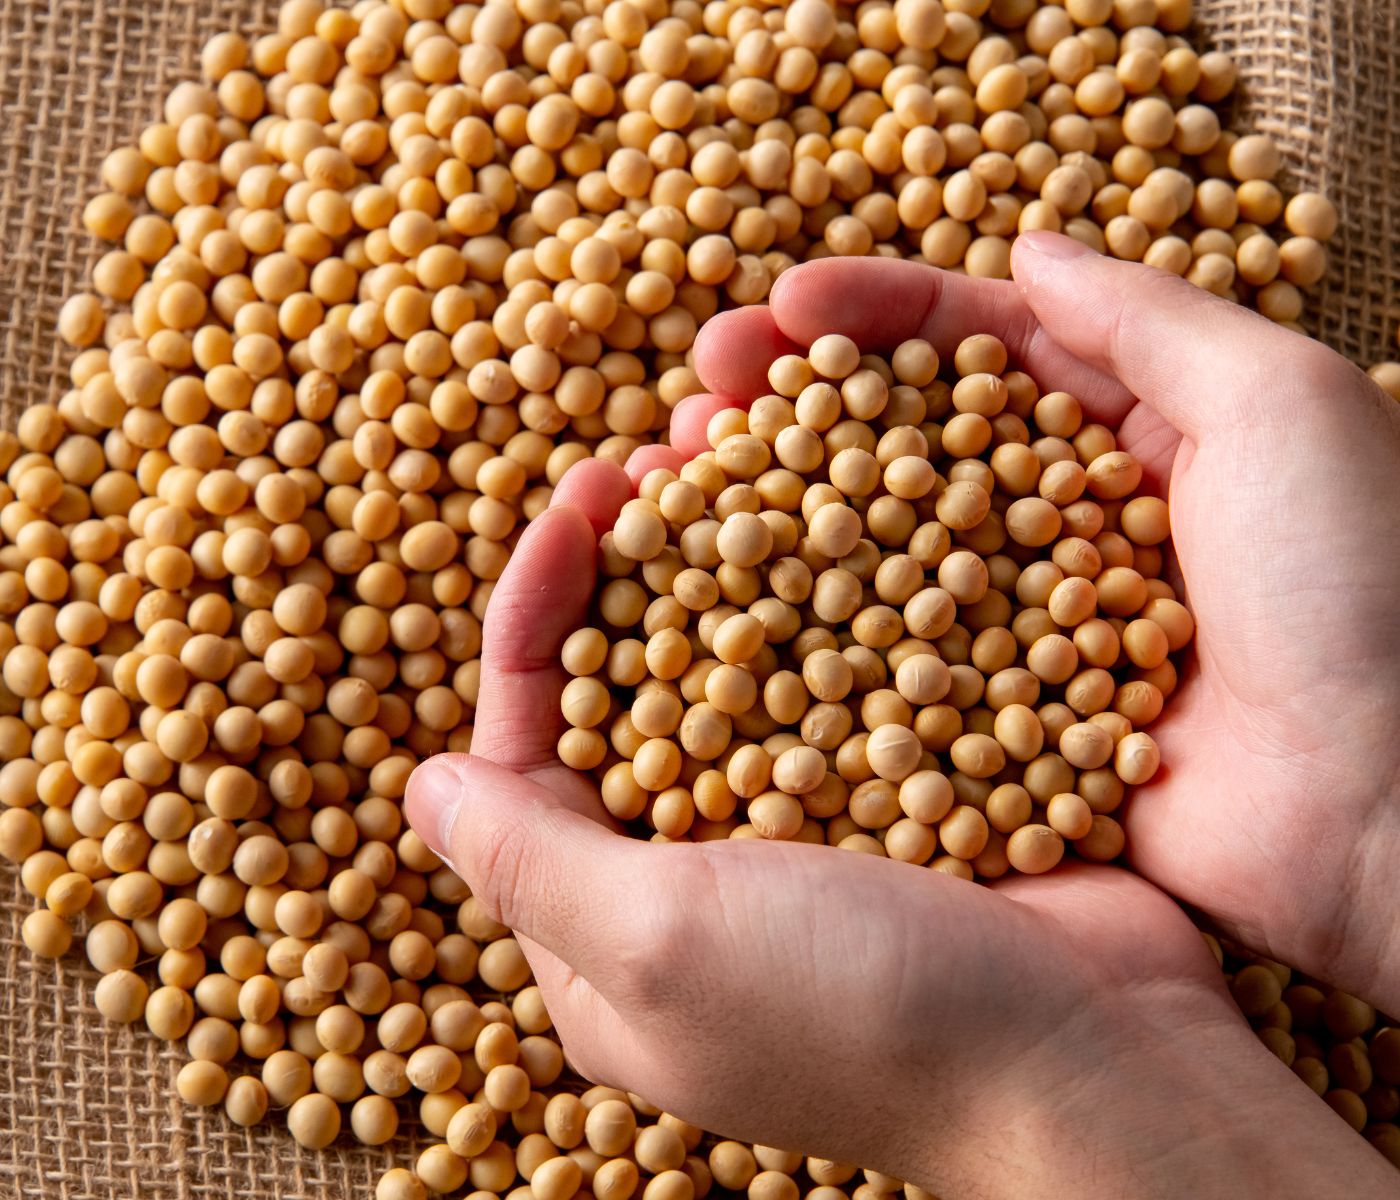 The USDA lowers its global soybean production estimate